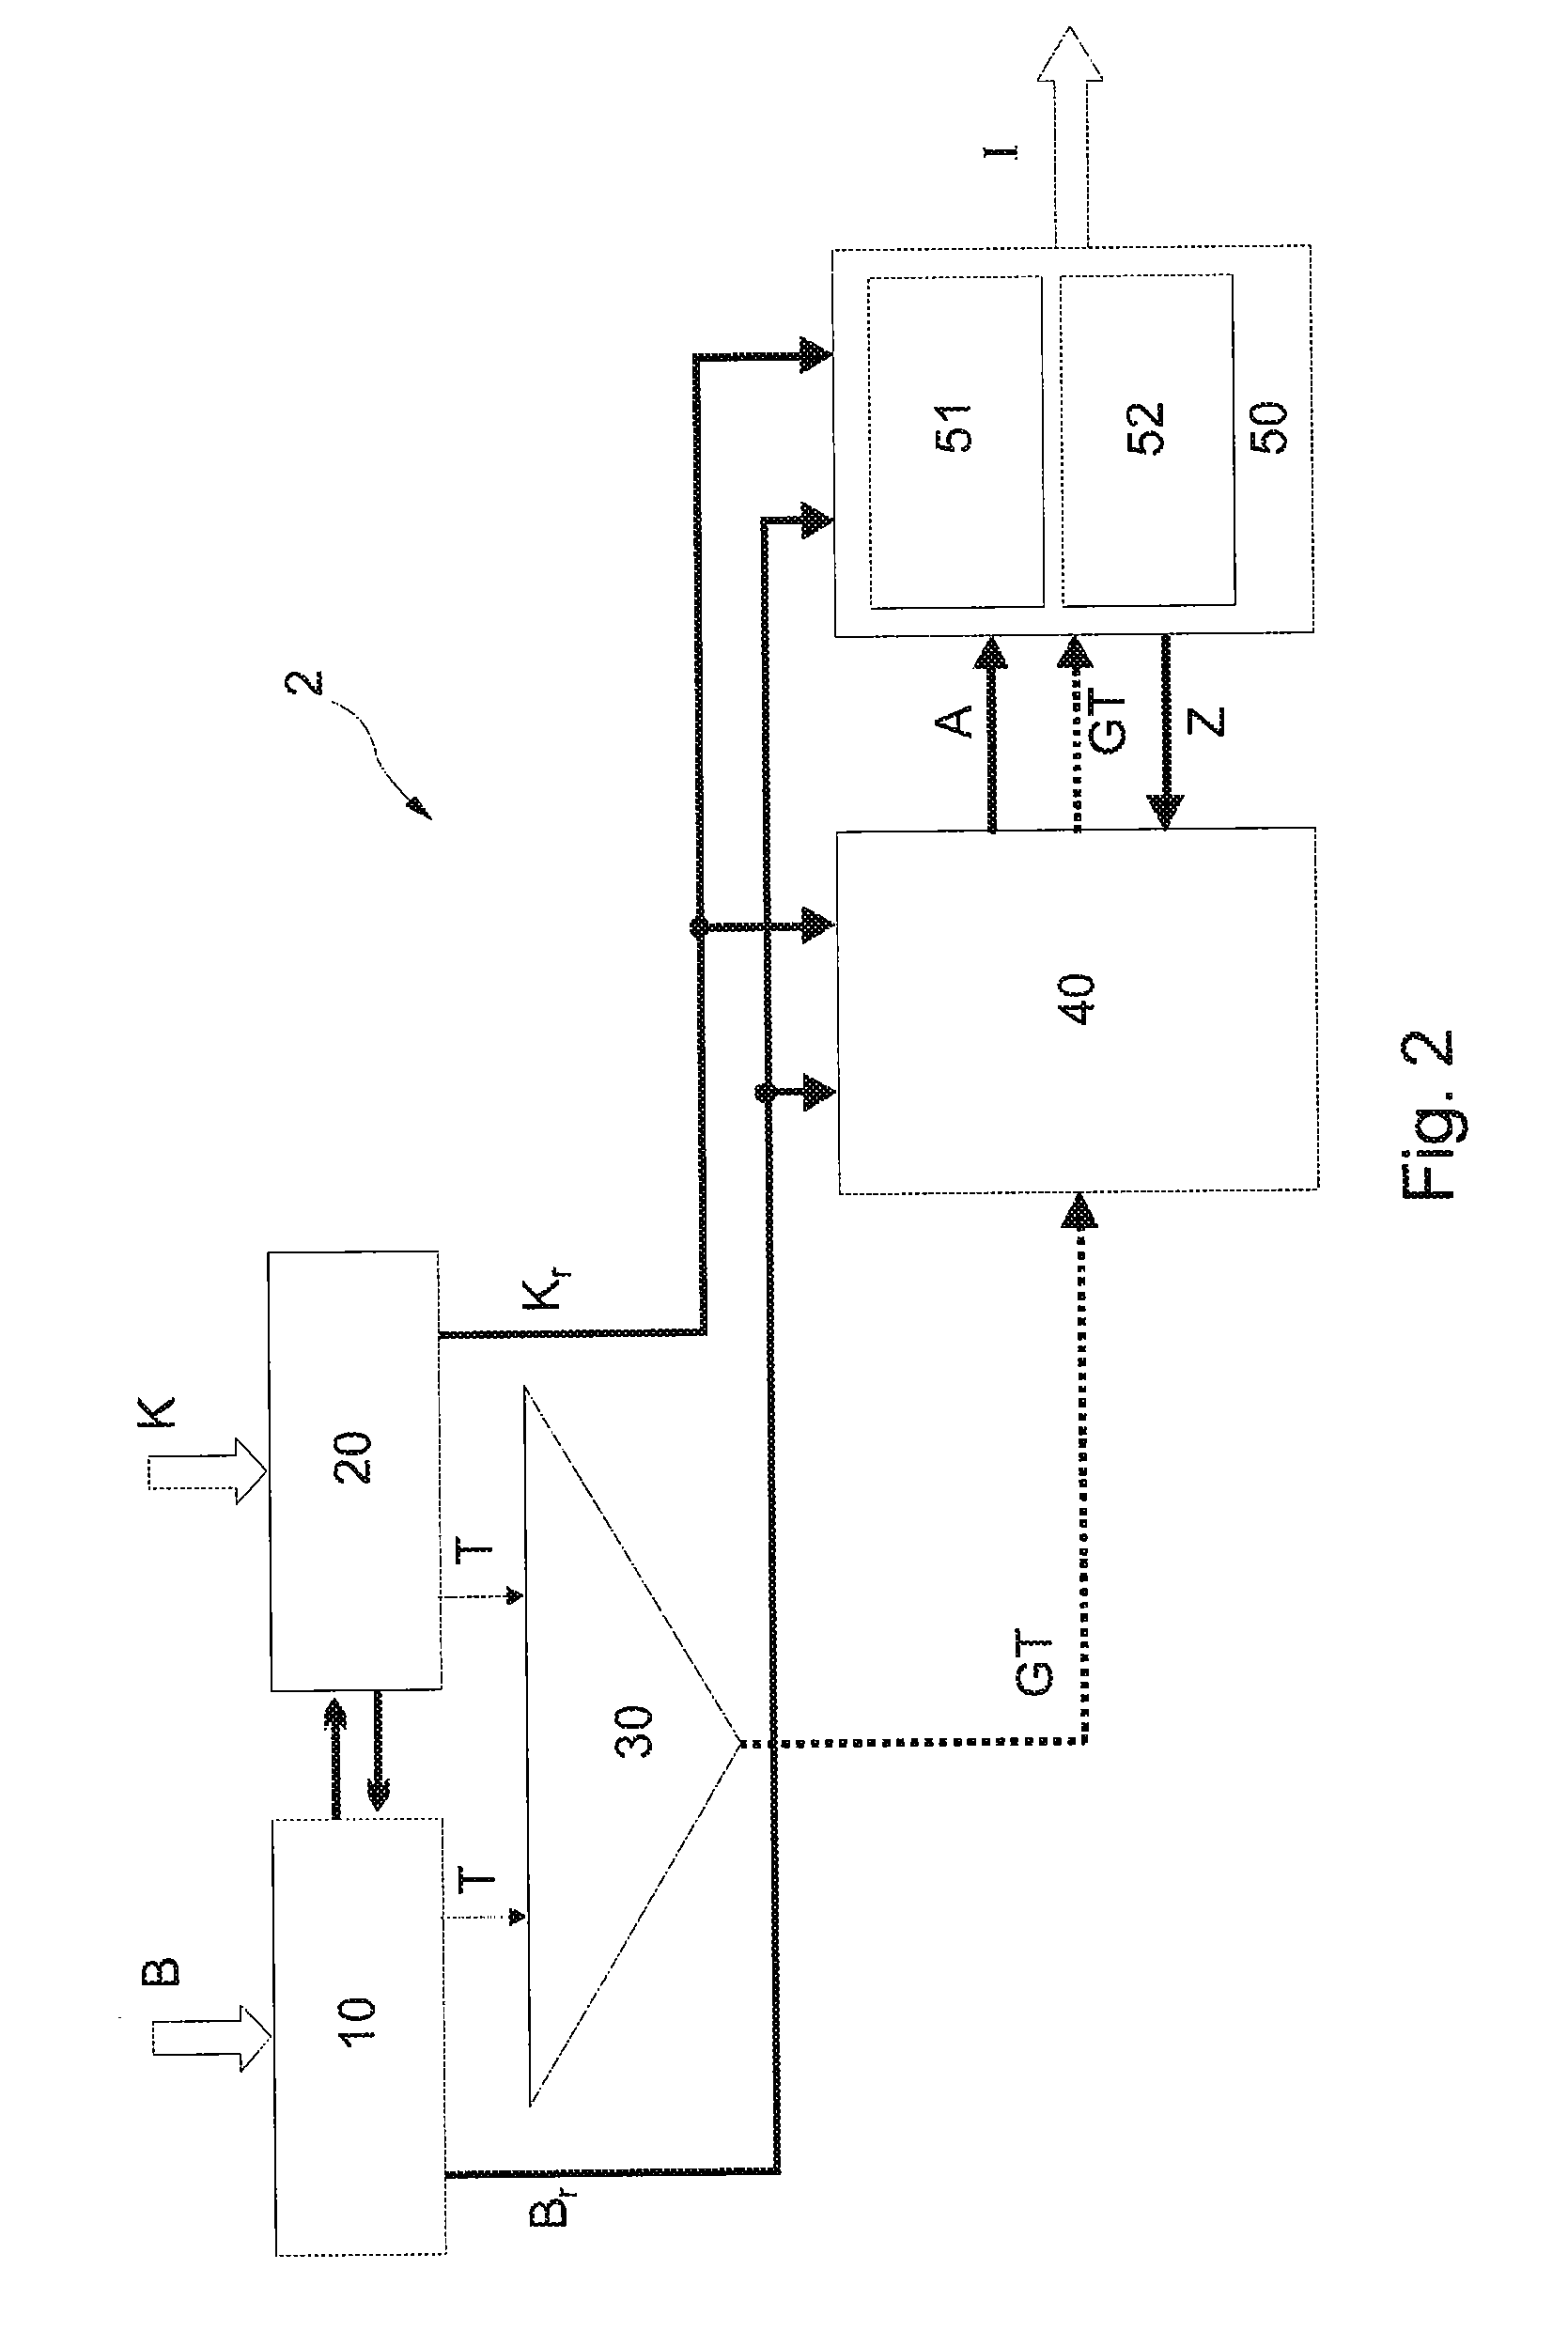 Method and device for identifying traffic-relevant information